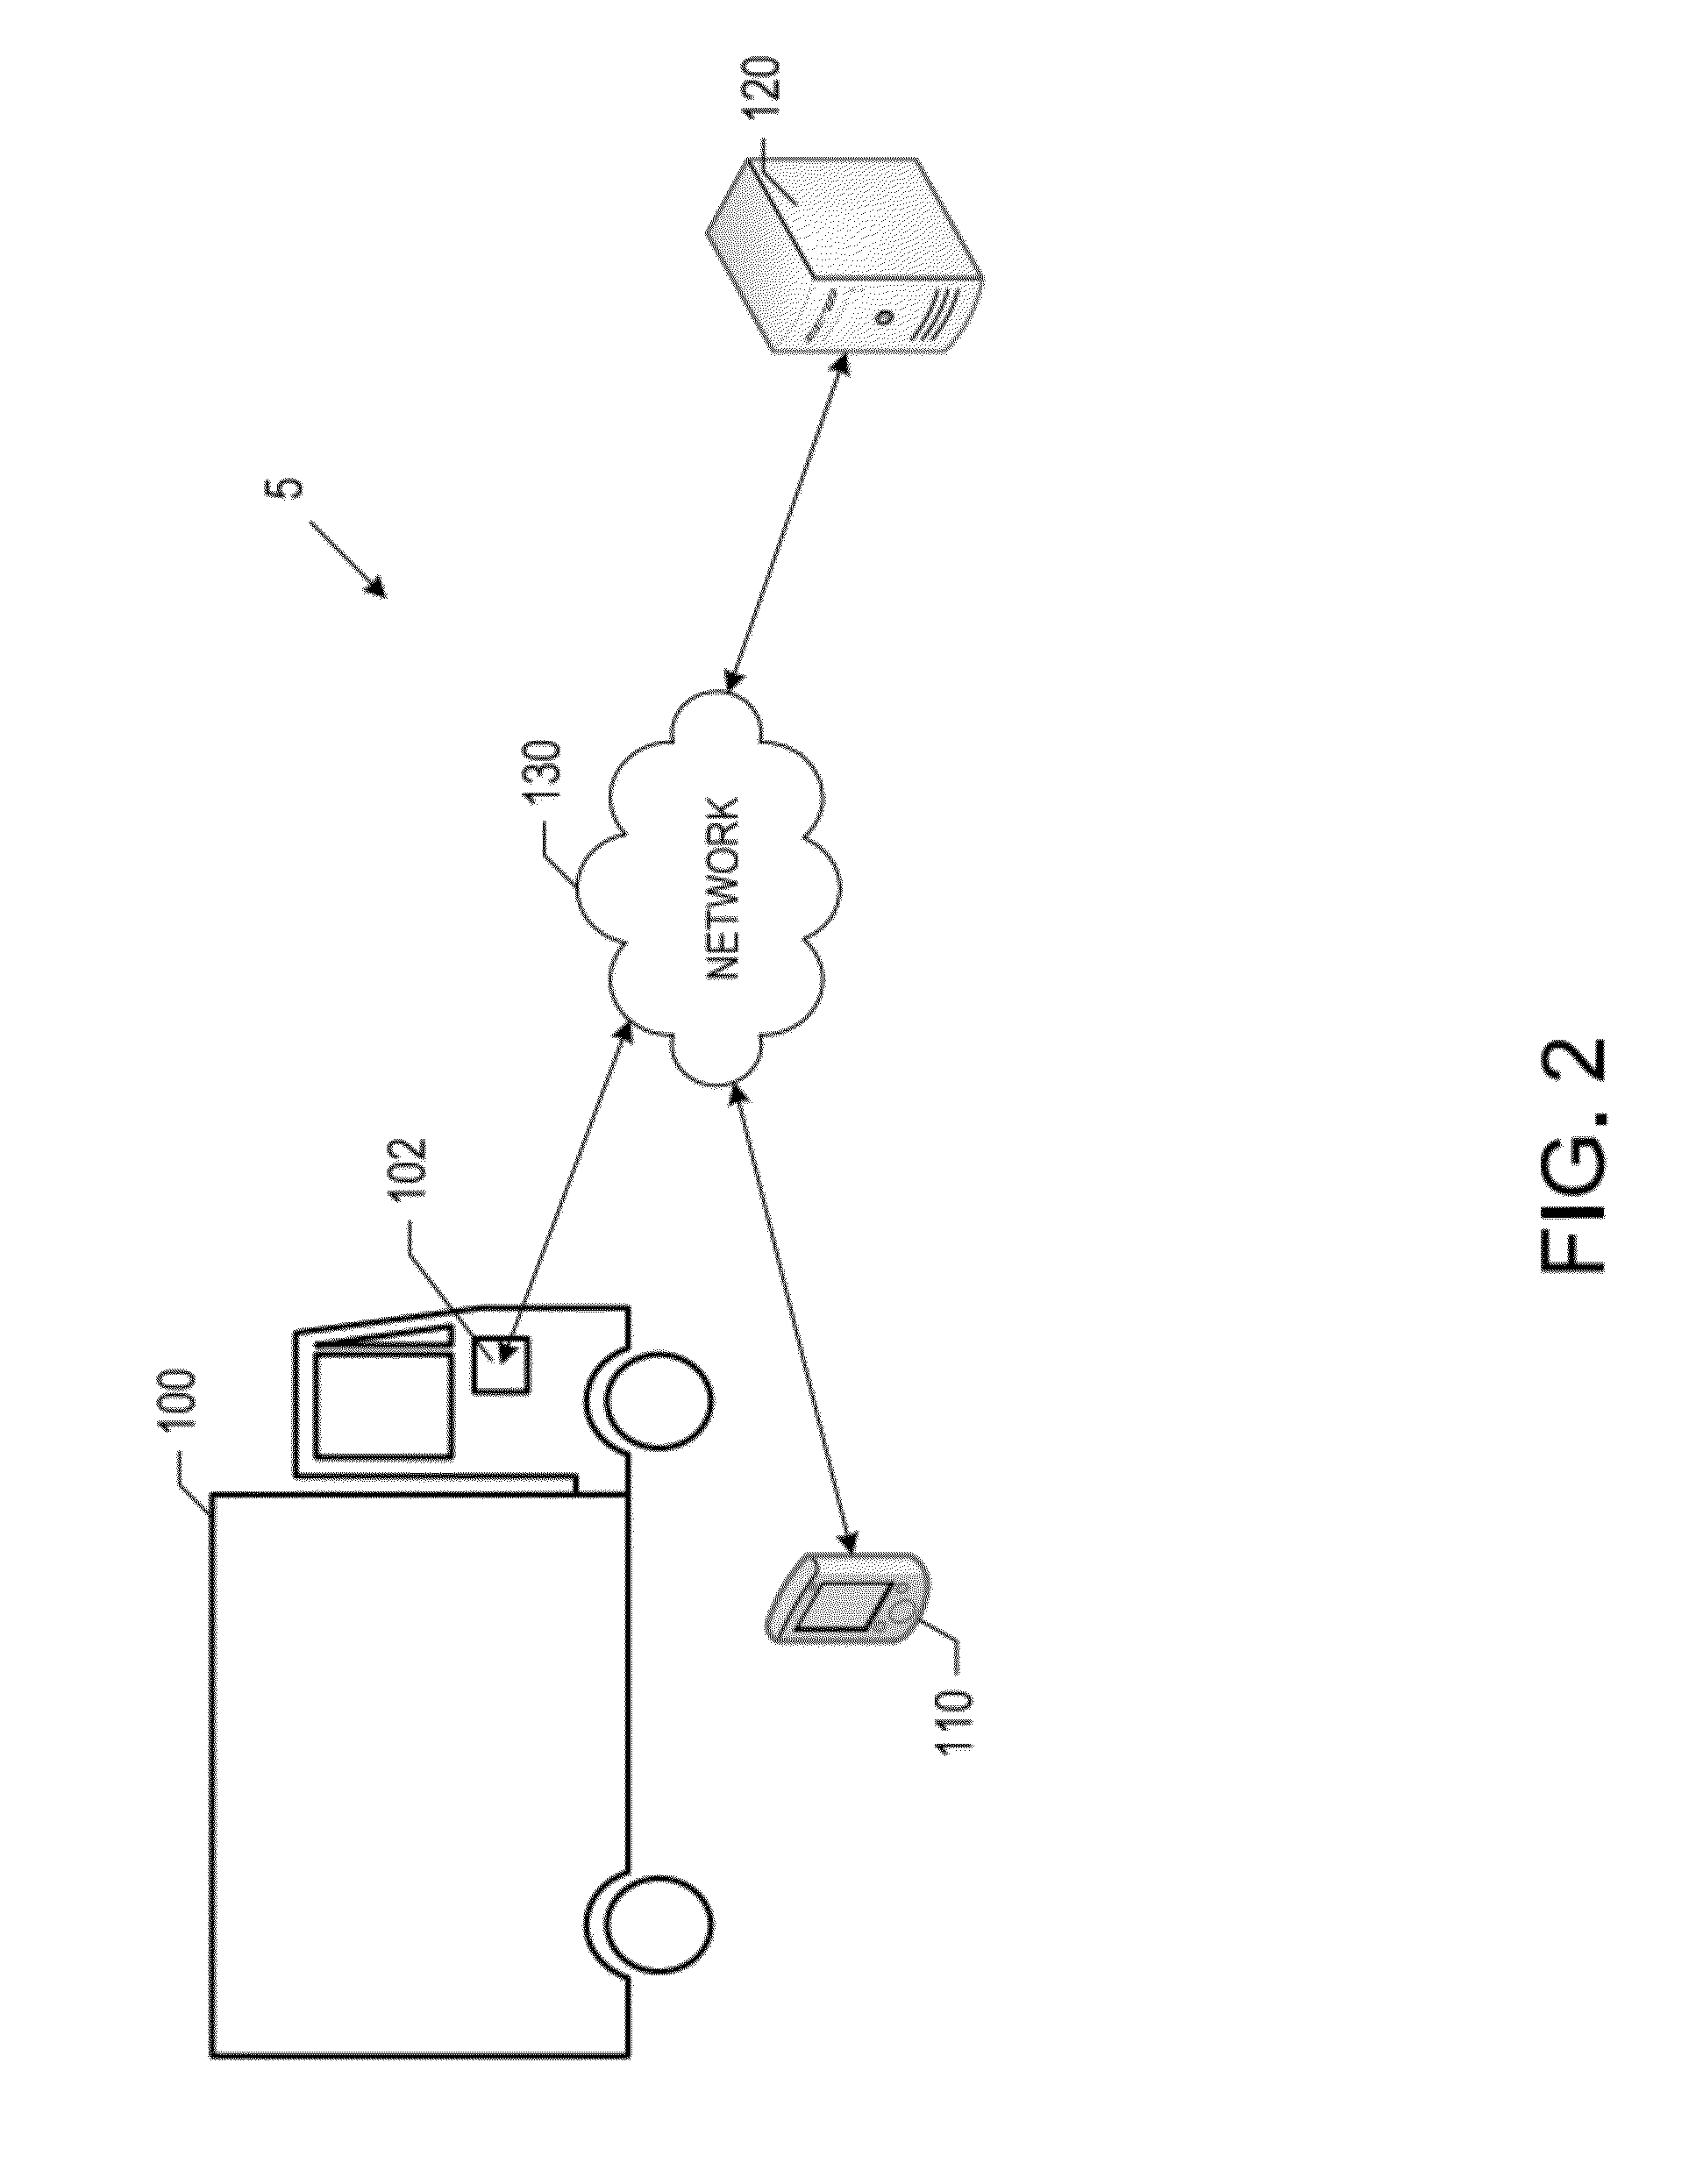 Systems and methods for providing a fleet management user interface